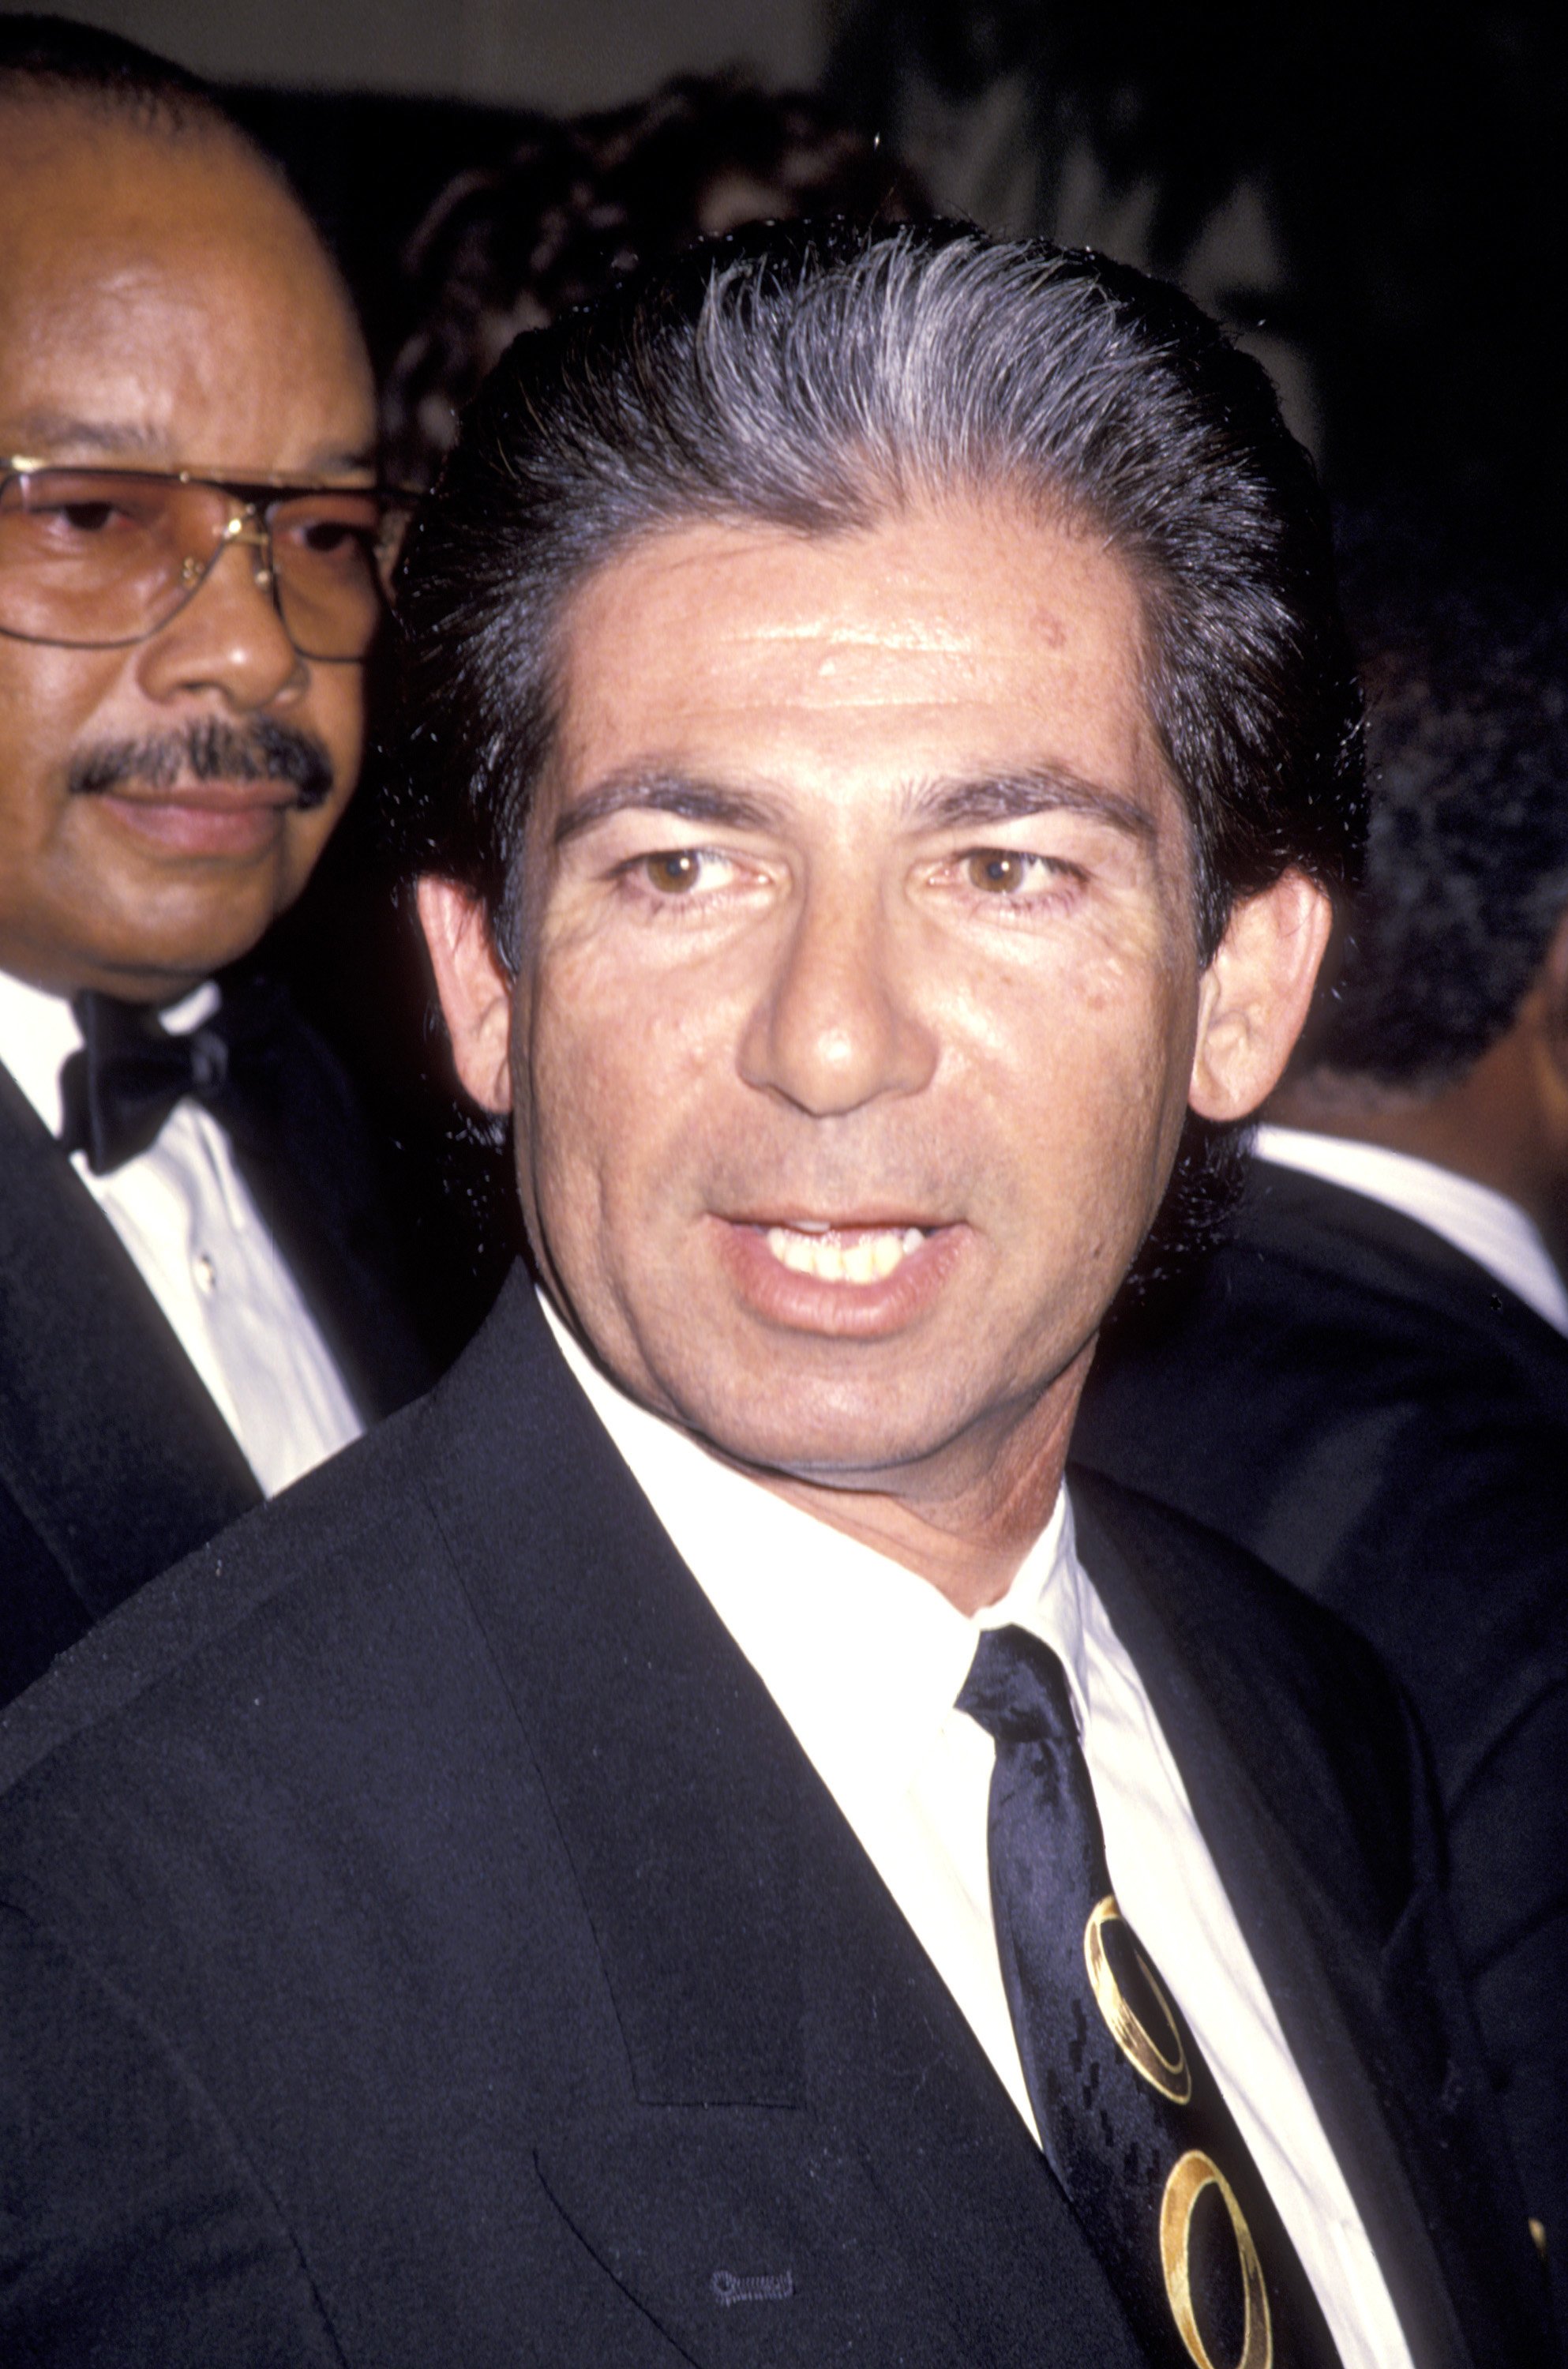 Robert Kardashian during Brotherhood Crusade Gala Dinner at Beverly Hilton Hotel in Beverly Hills, CA. | Source: Getty Images